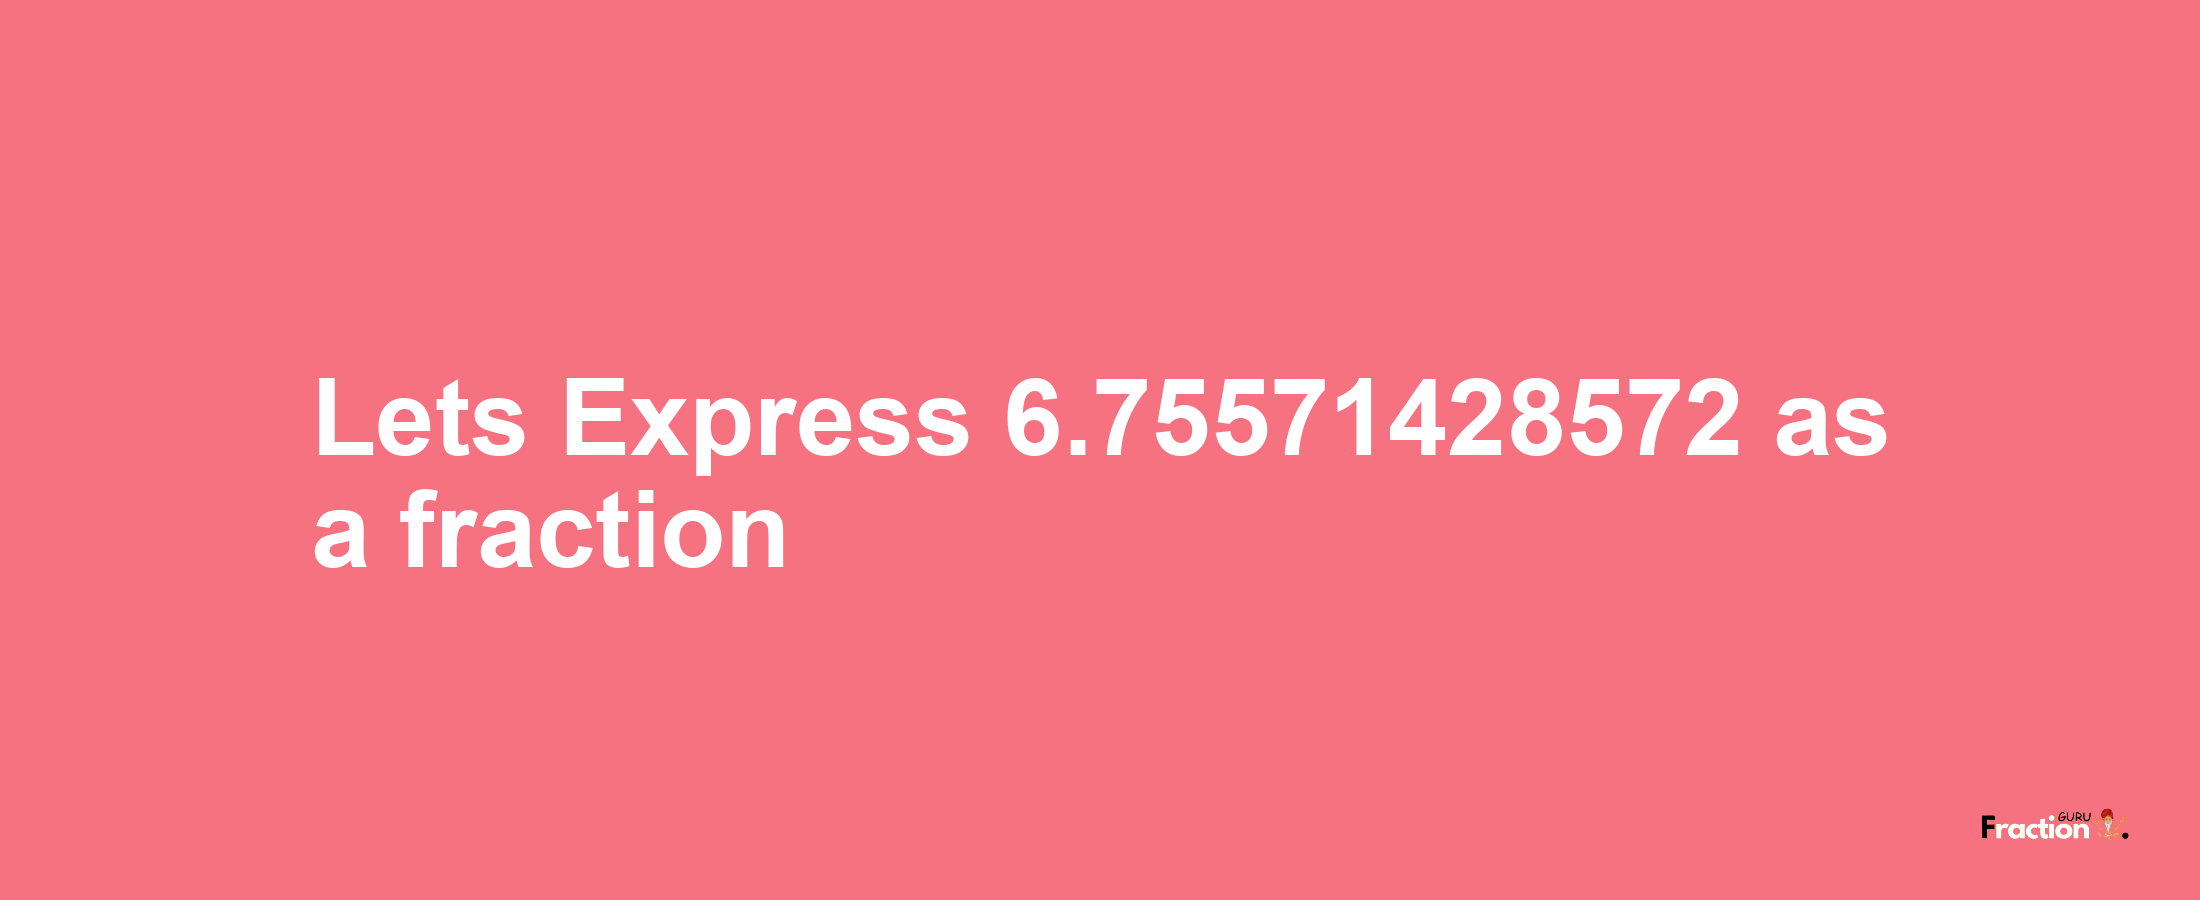 Lets Express 6.75571428572 as afraction